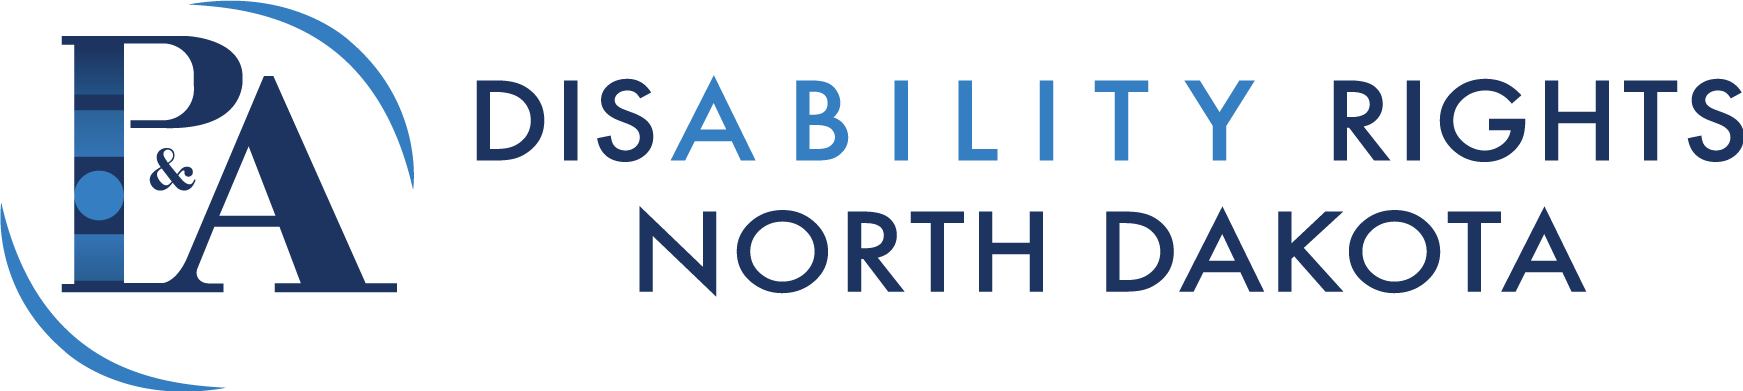 ND protection and advocacy horizontal logo "disability rights north dakota"